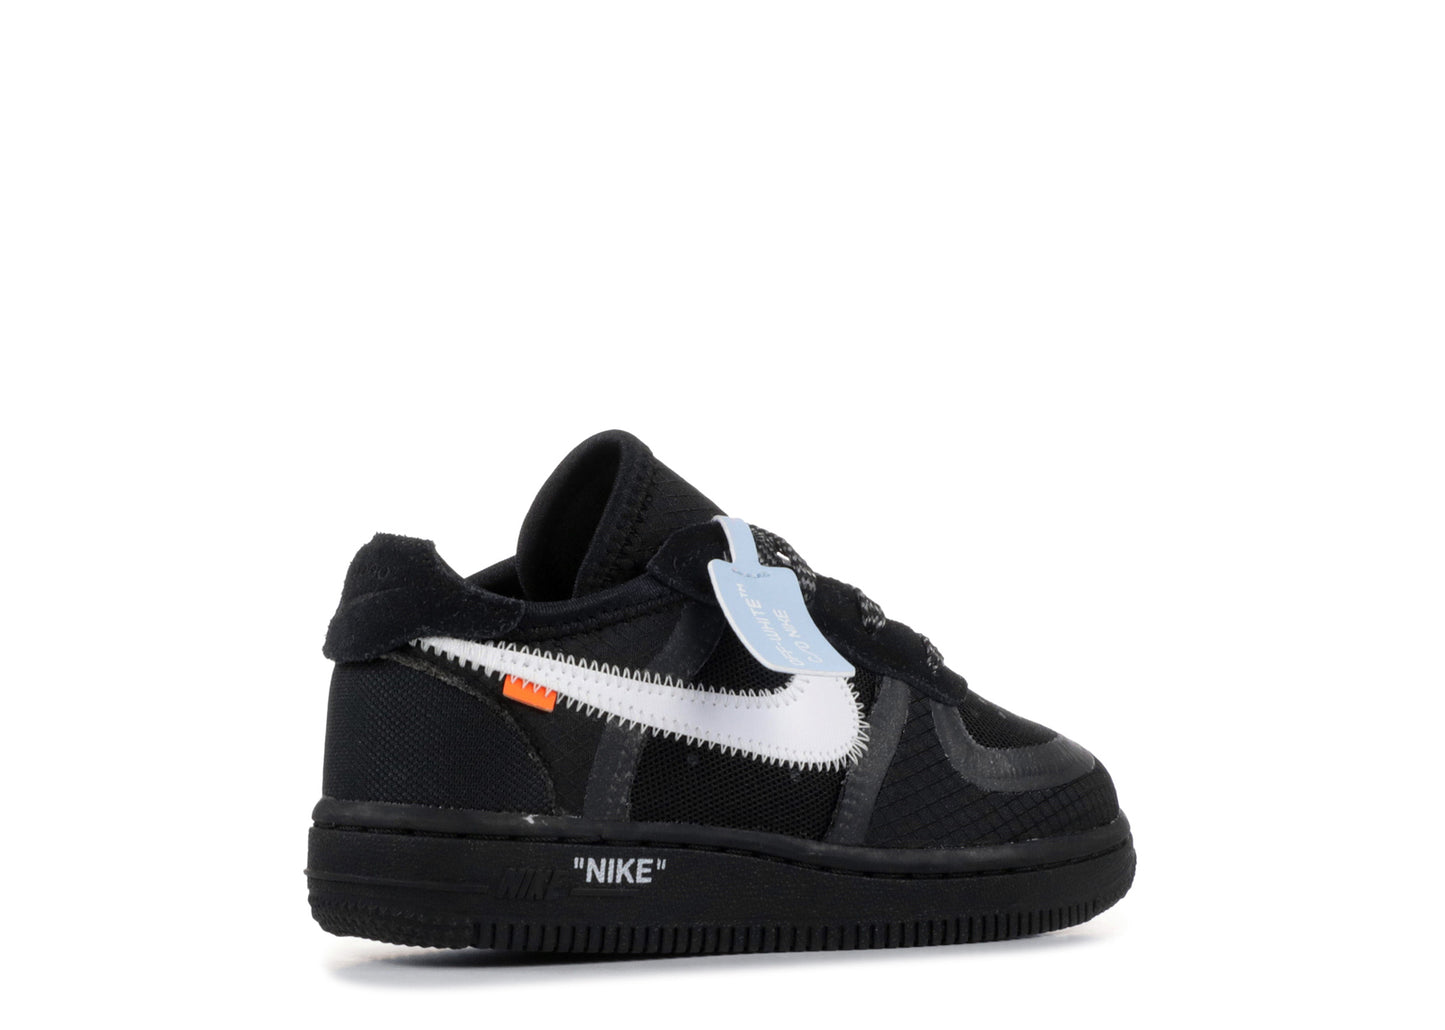 Off White x Nike Air Force 1 Low TD "Black"